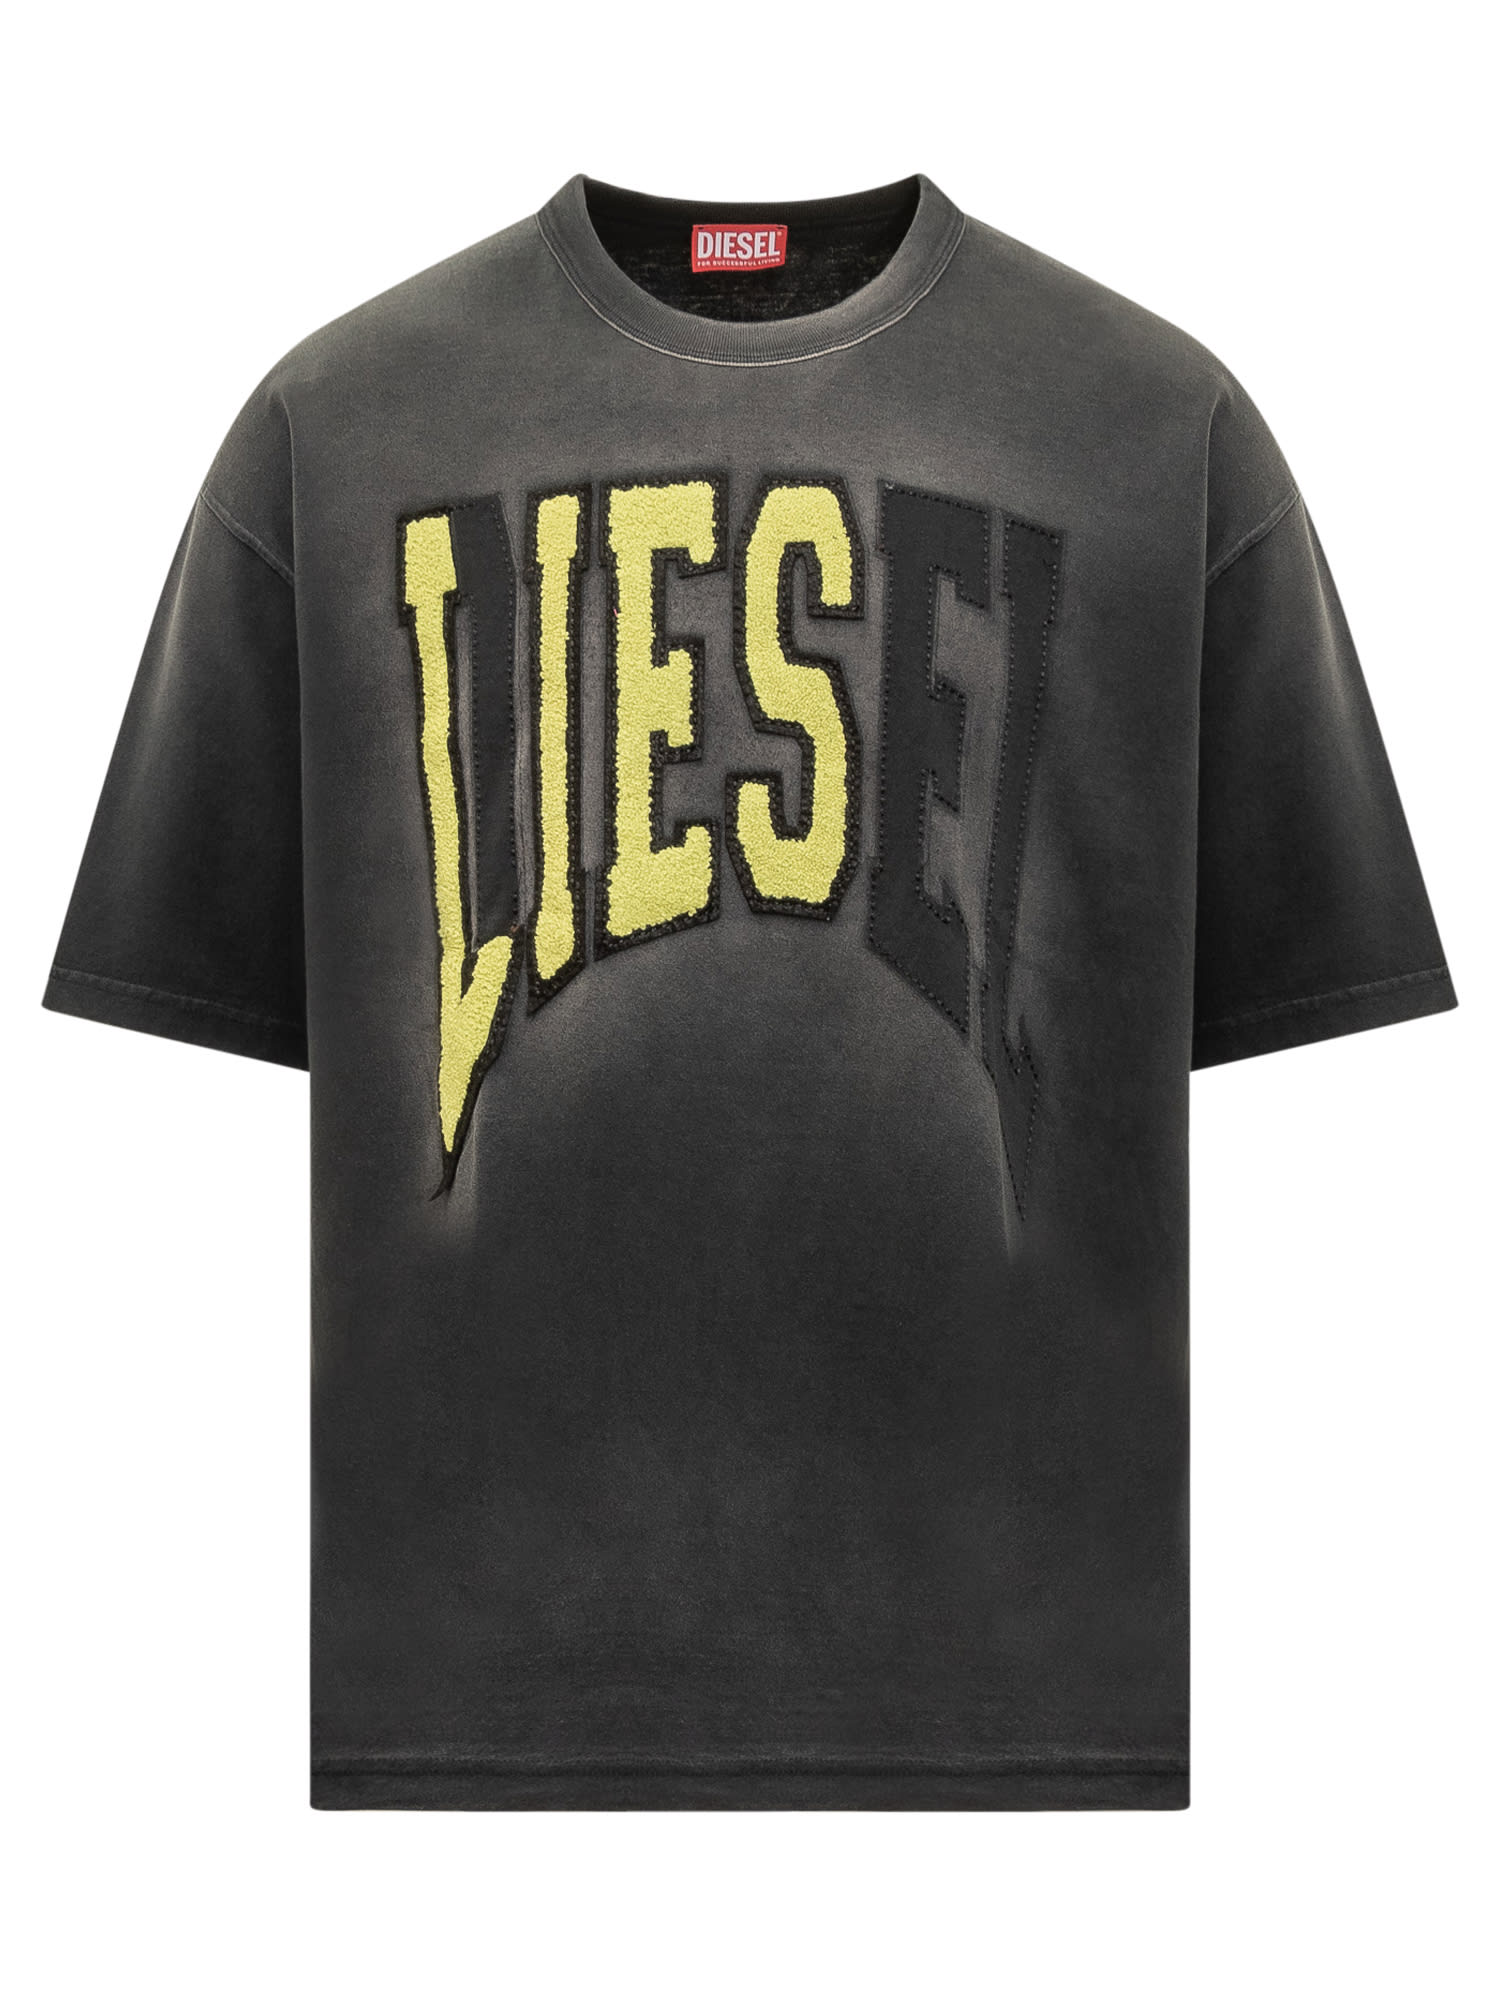 DIESEL T-SHIRT WITH SHADED EFFECT AND LOGO